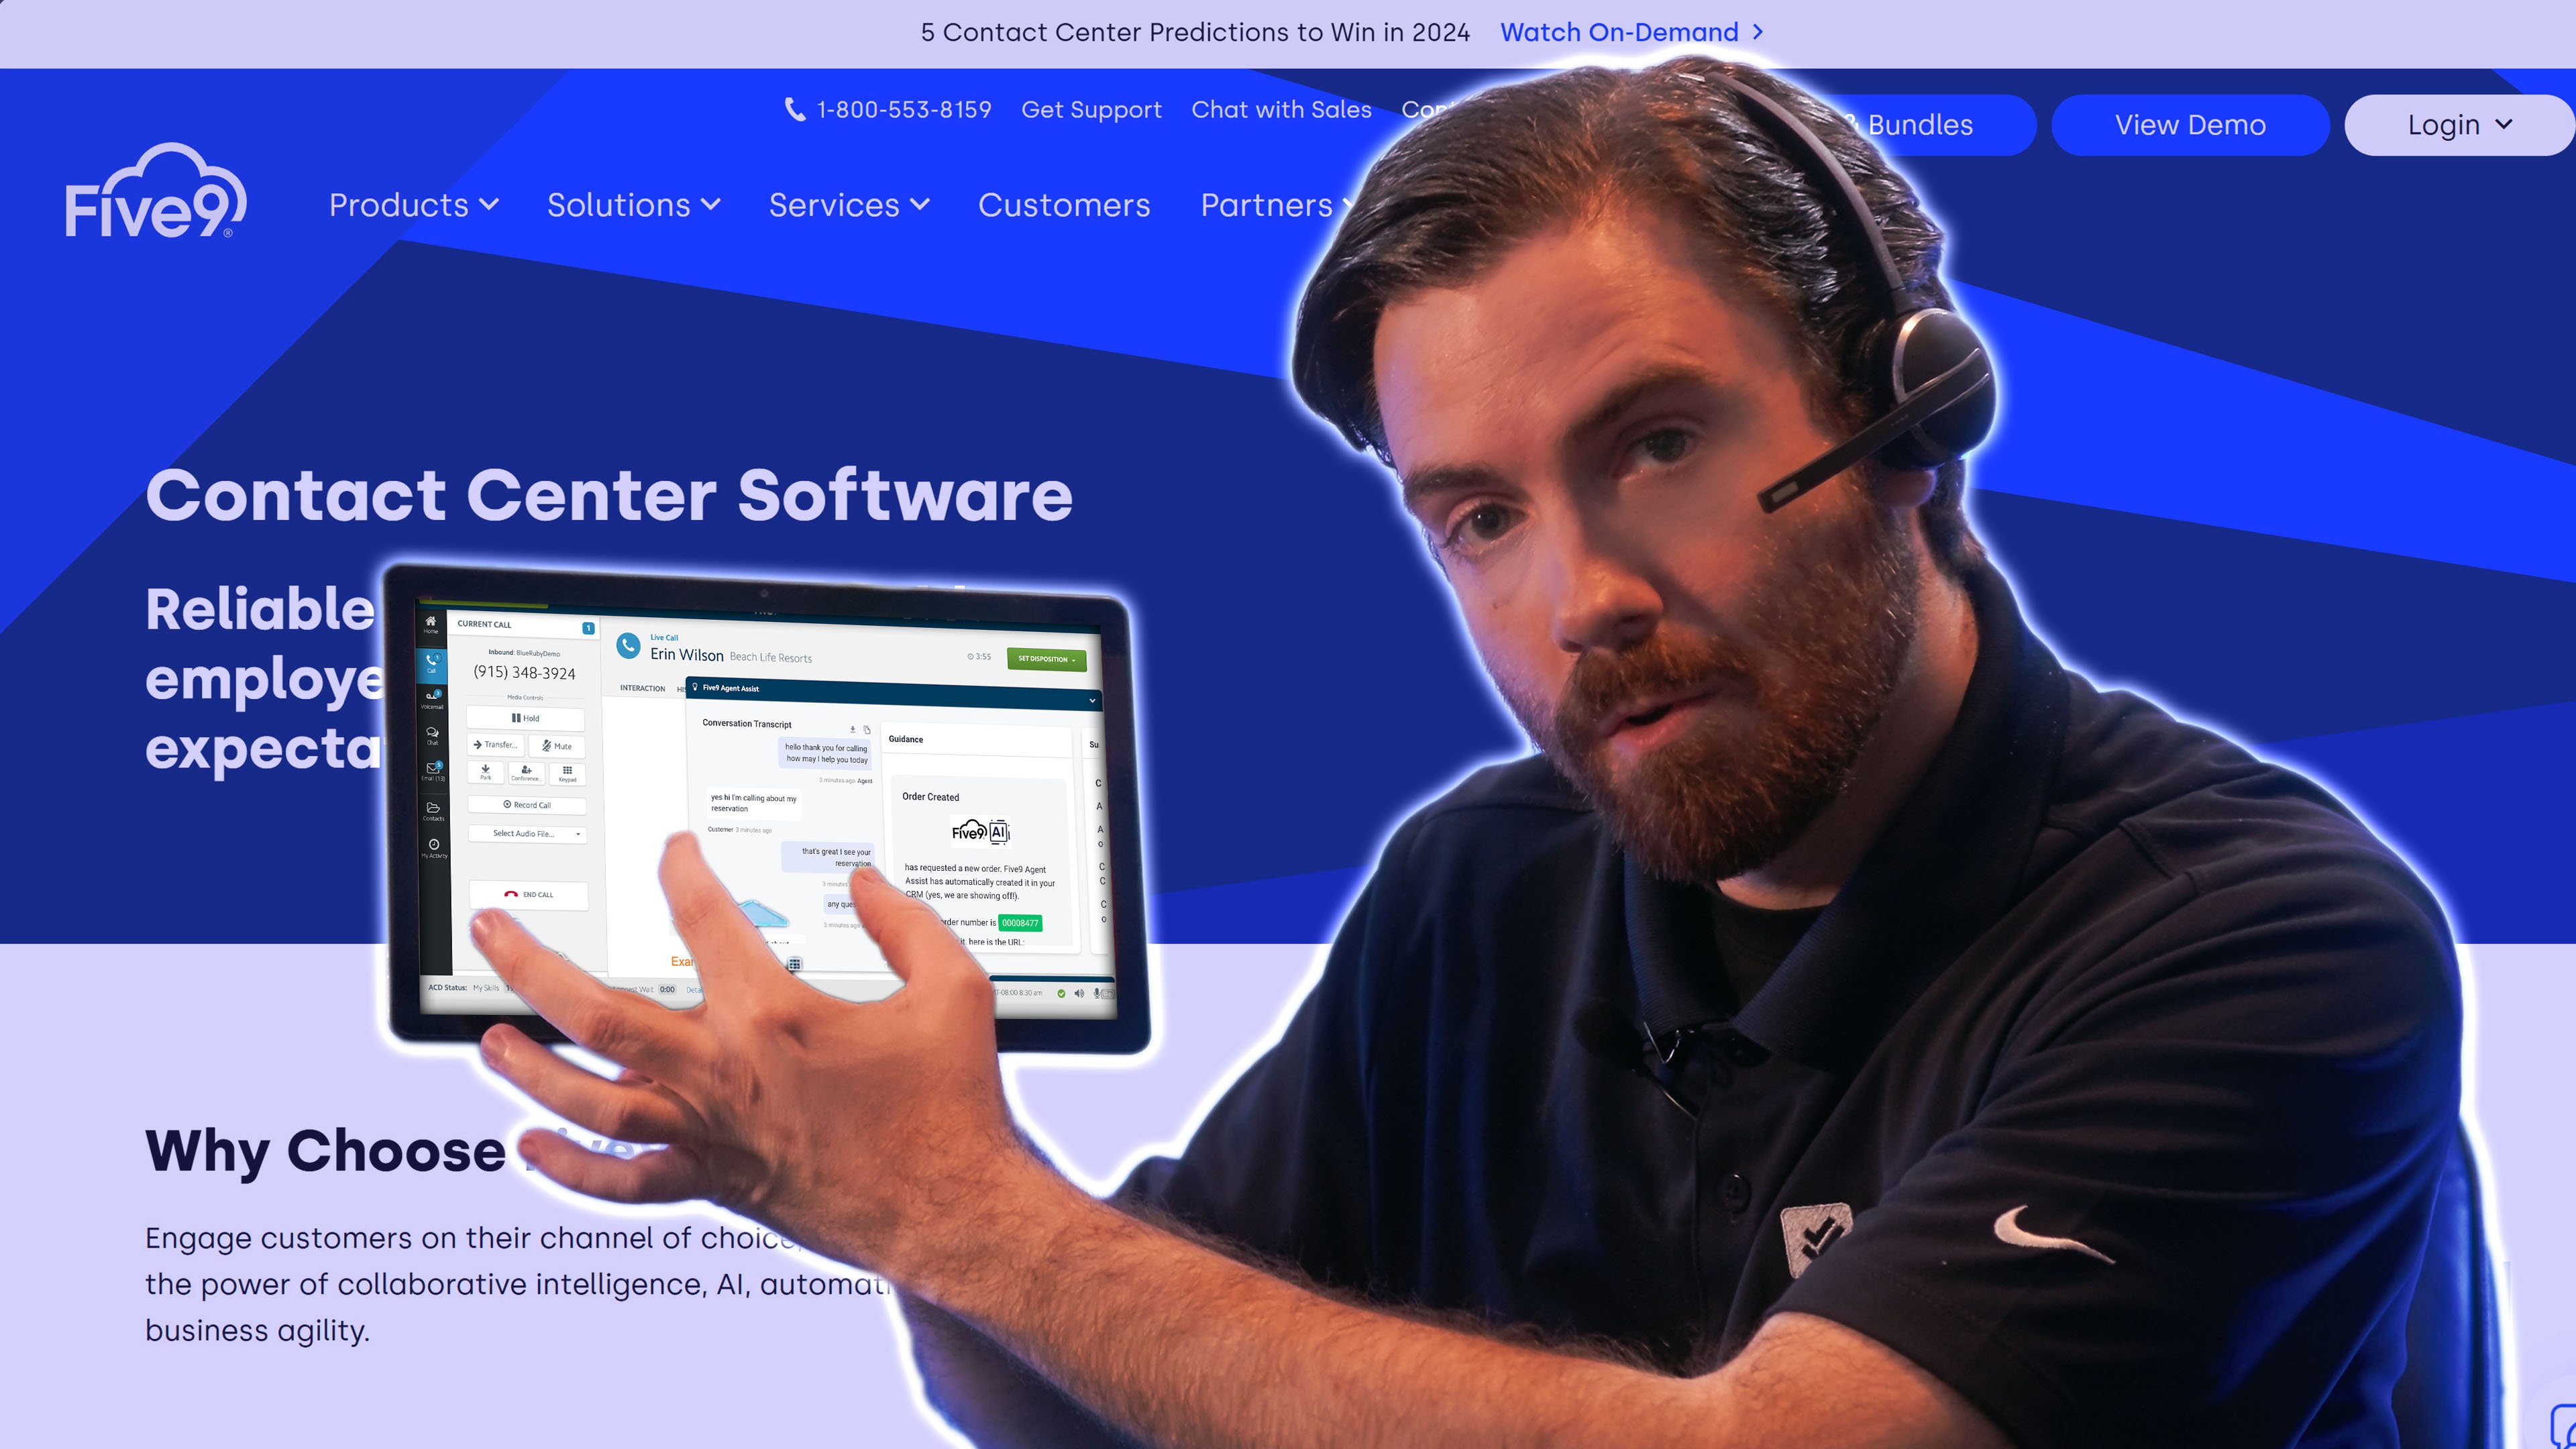 Nate Reviews Five9 Contact Center Software